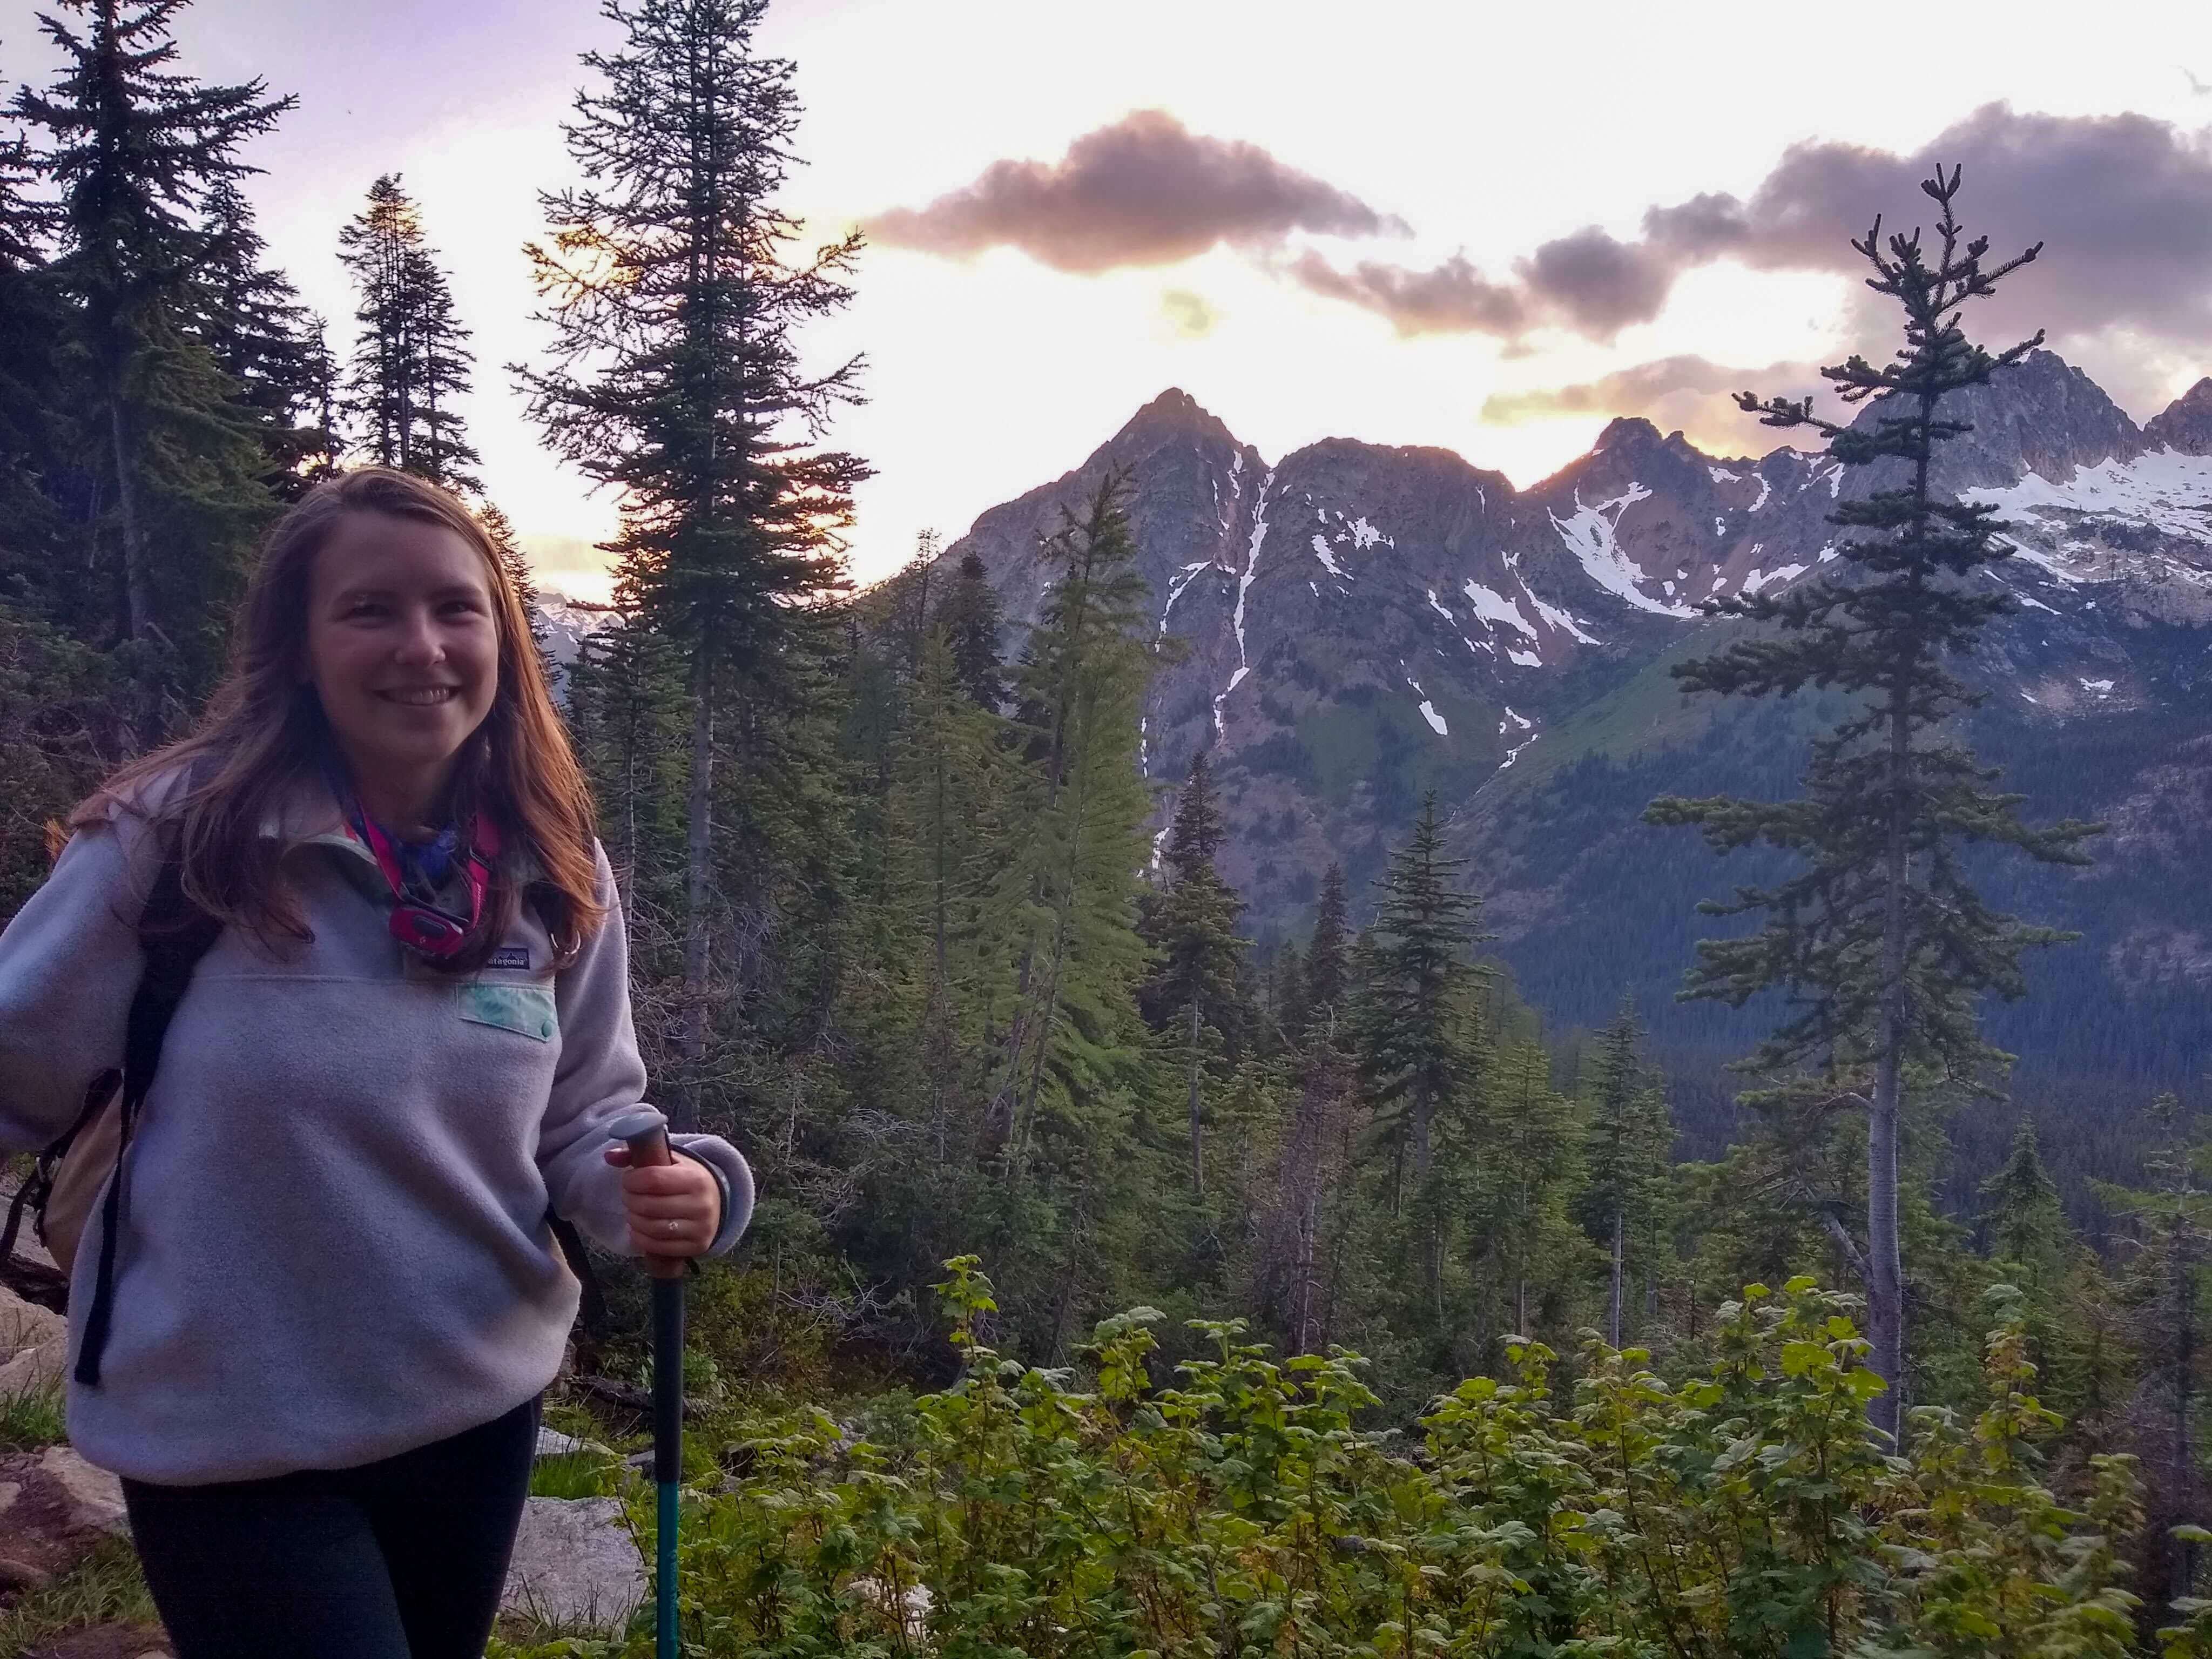 A hiker smiling during a sunset hike